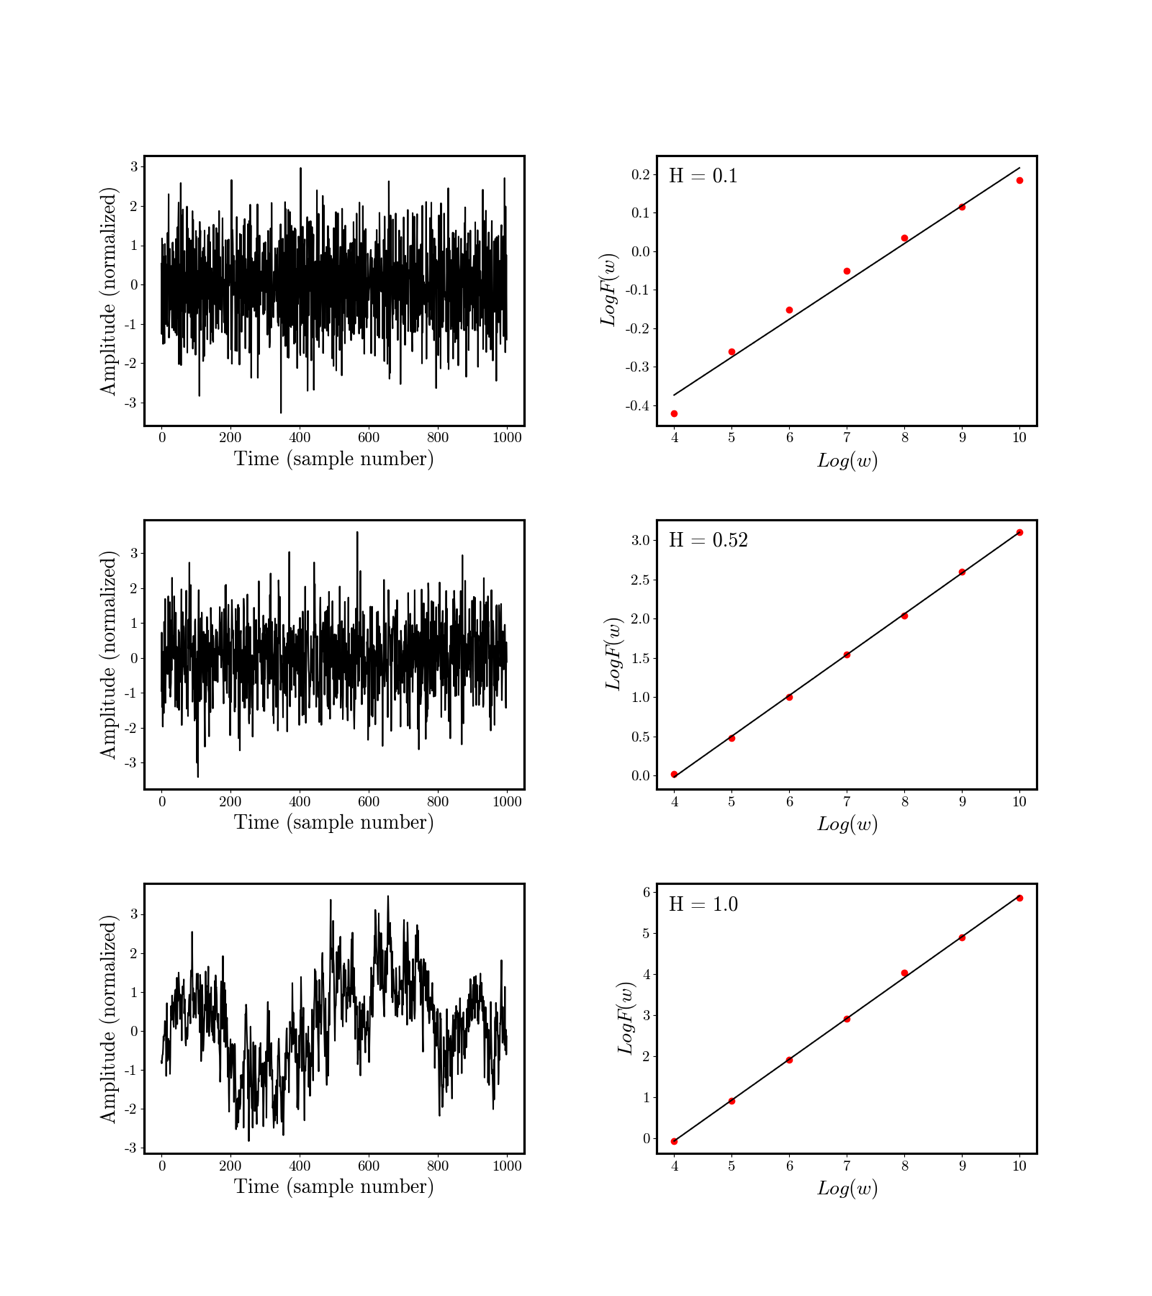 Left: Time series that exhibit anti-persistent (top), short-range
							(middle), and long-range (bottom) dependencies. Anti-persistent time series
							oscillate rapidly around its average, which is sometimes referred to as
							mean-reverting or rigid behavior. Short-range dependencies are indicated by
							the short cycles, while long-range dependencies show repetitive cycles at
							multiple time scales. Right: Estimation of the Hurst exponent as the slope
							of the residual fit F(w) on the time window w for the matching time series
							in the left column. Anti-persistent time series have a slope < 0.5, the
							slope for short-range dependencies is 0.5, and long-range dependencies
							>0.5.